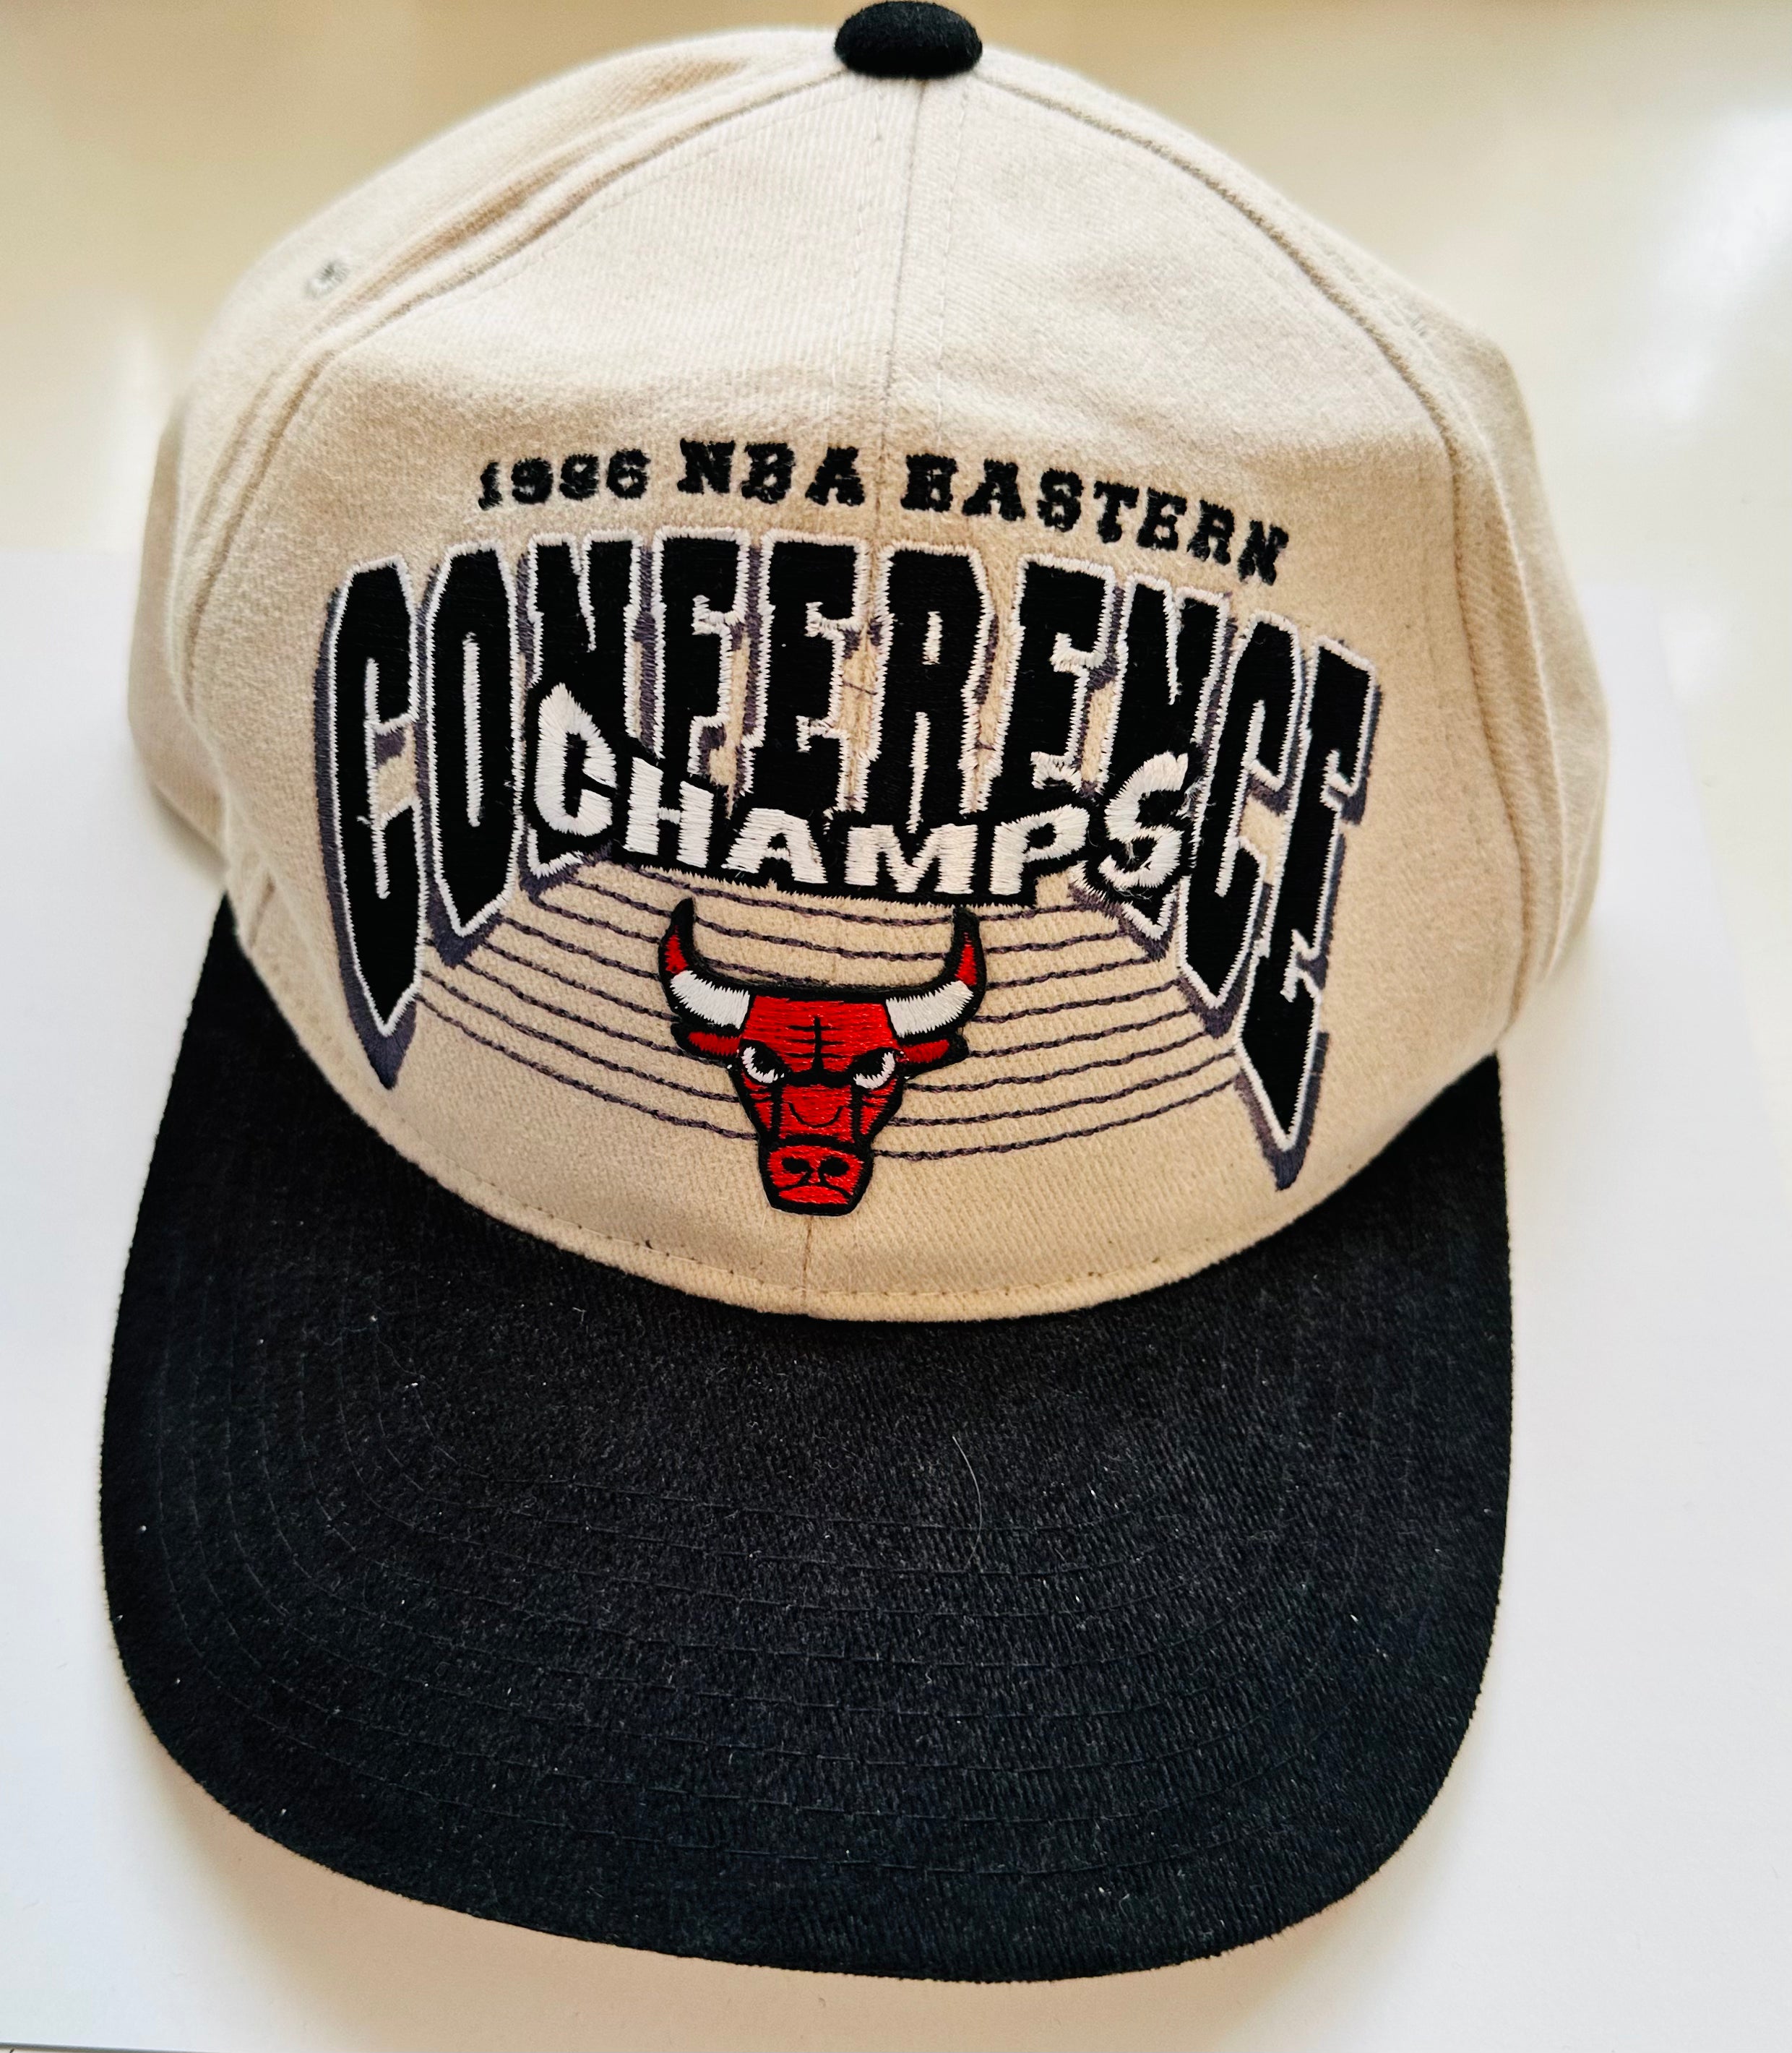 Chicago Bulls basketball rare Eastern Conference SnapBack hat 1996